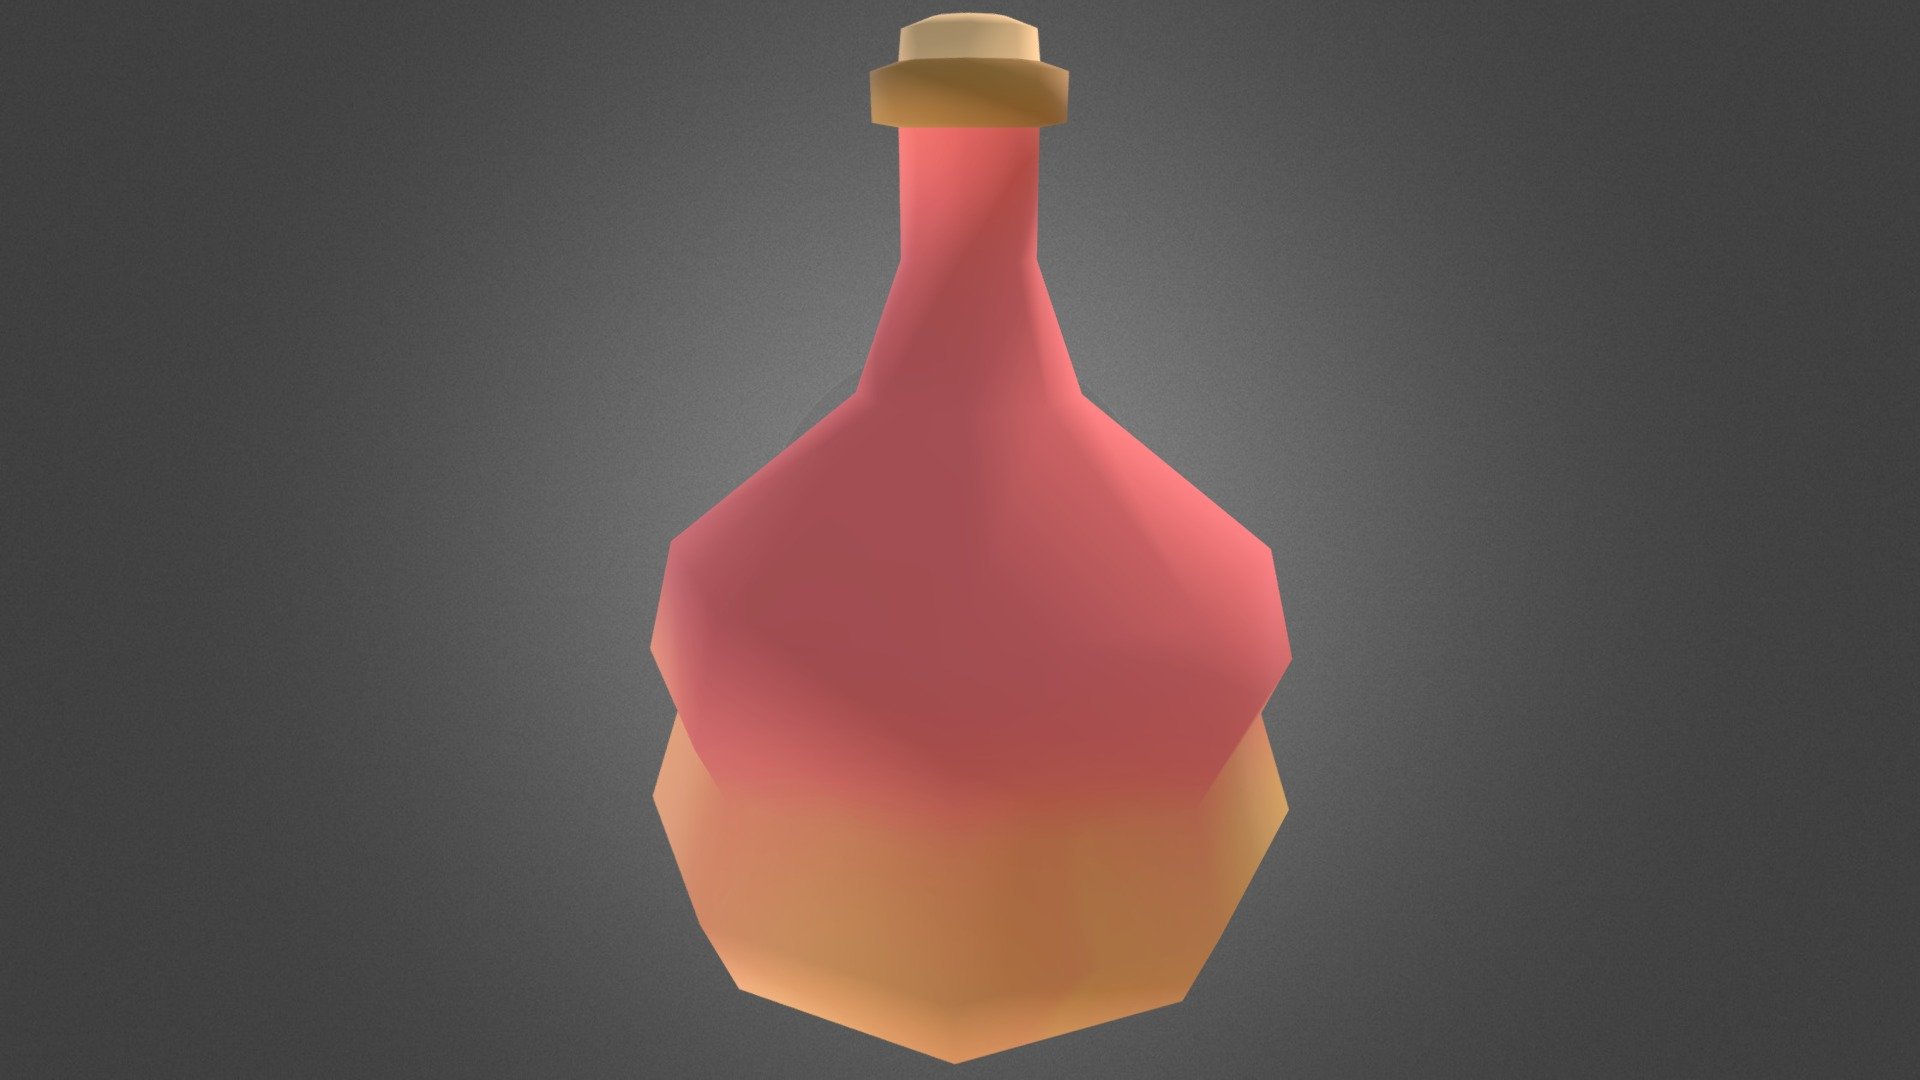 Cartoon Red Vase Modeled in blender.
Thought Id upload it If anyone wants to download.
This is part one of the Vase Series 3d model